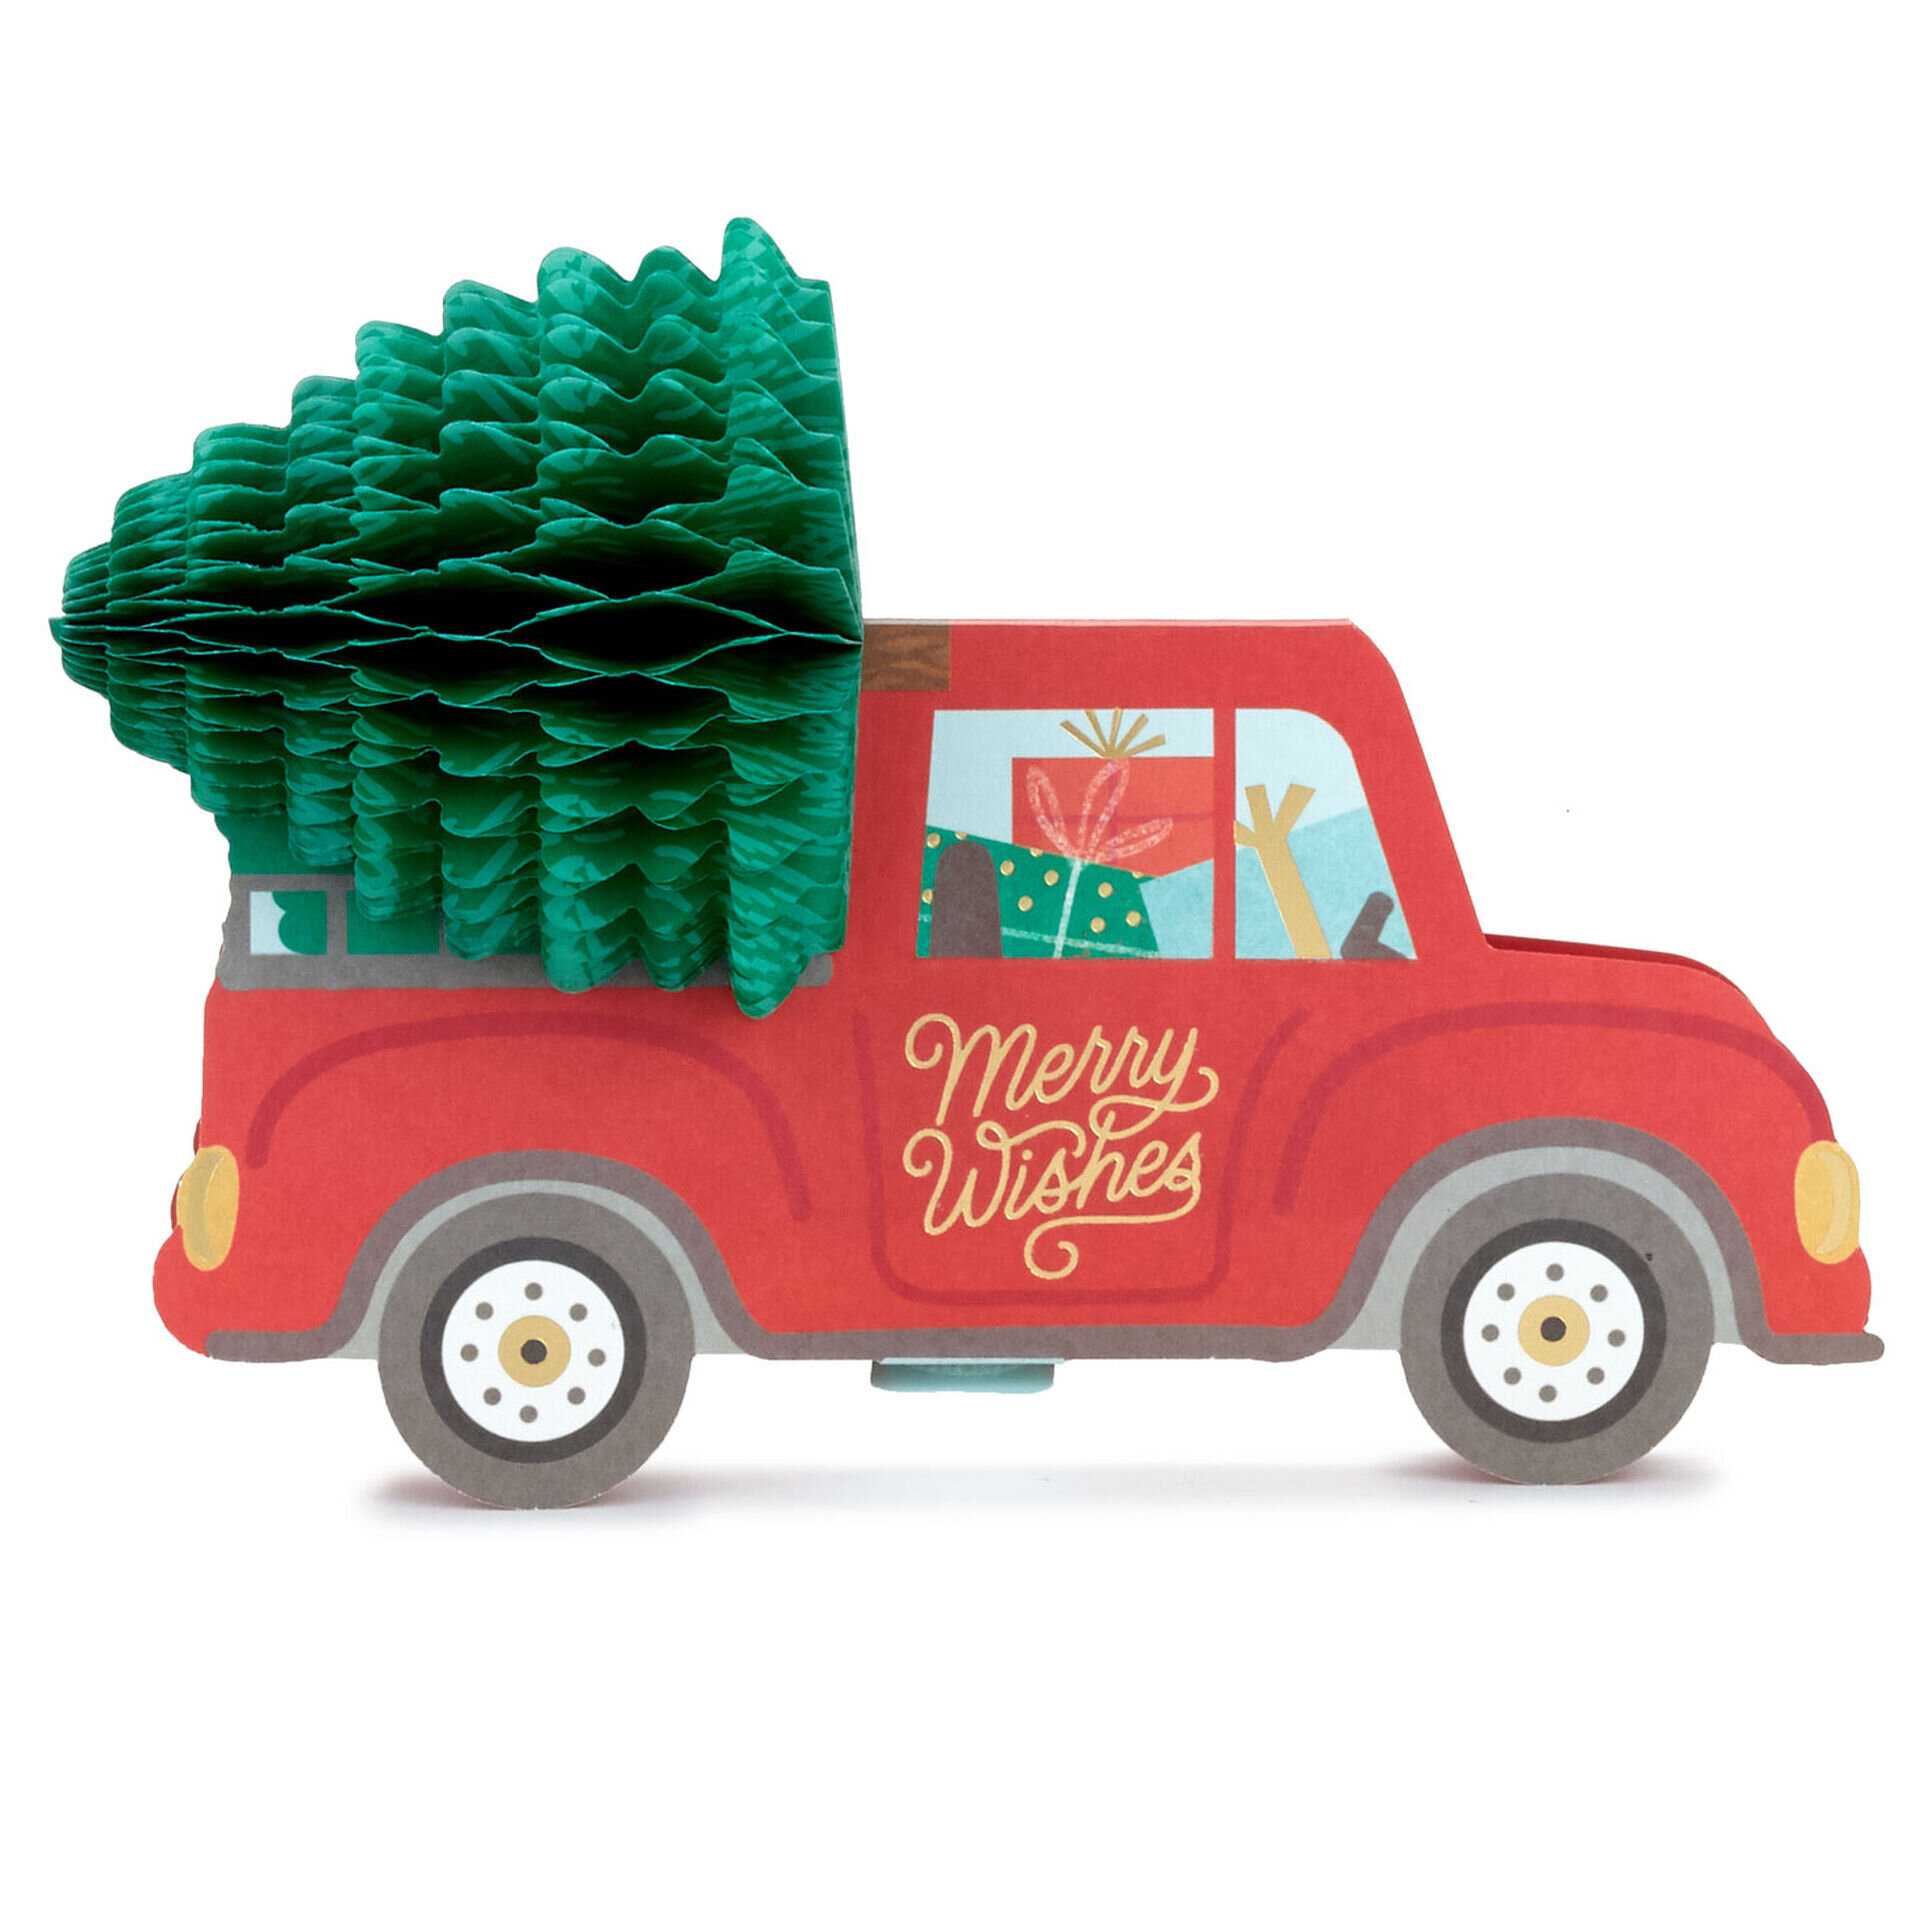 Red-Truck-With-Tree-Honeycomb-3D-PopUp-Christmas-Card_699XPJ5174_02.jpg